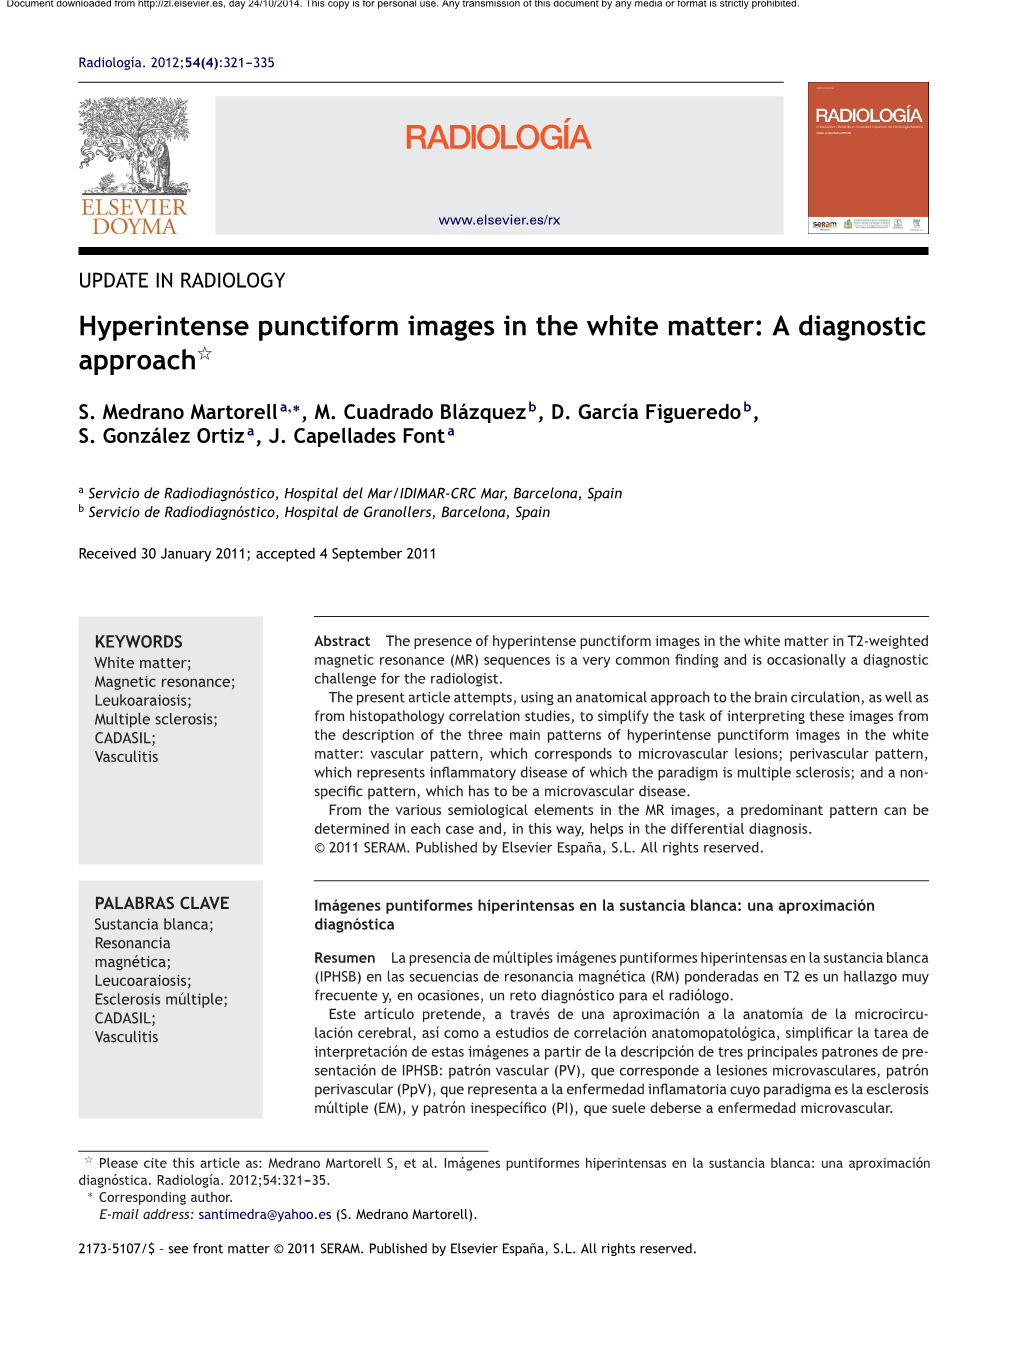 Hyperintense Punctiform Images in the White Matter: a Diagnostic Approachଝ